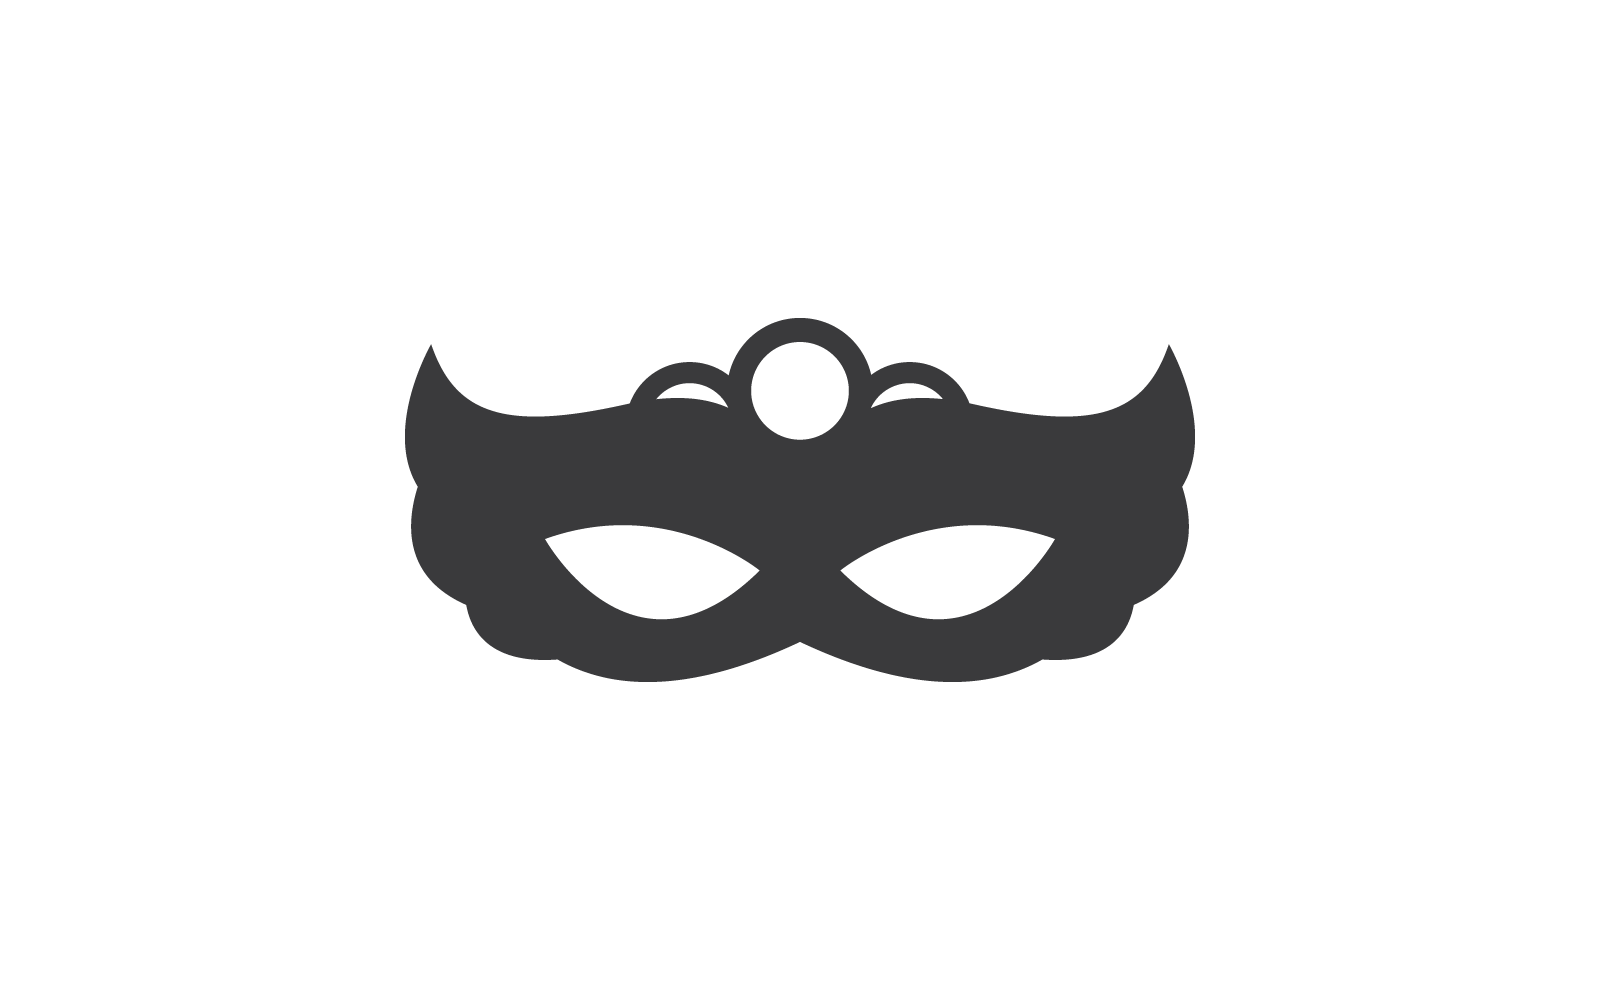 Party mask black icon vector illustration